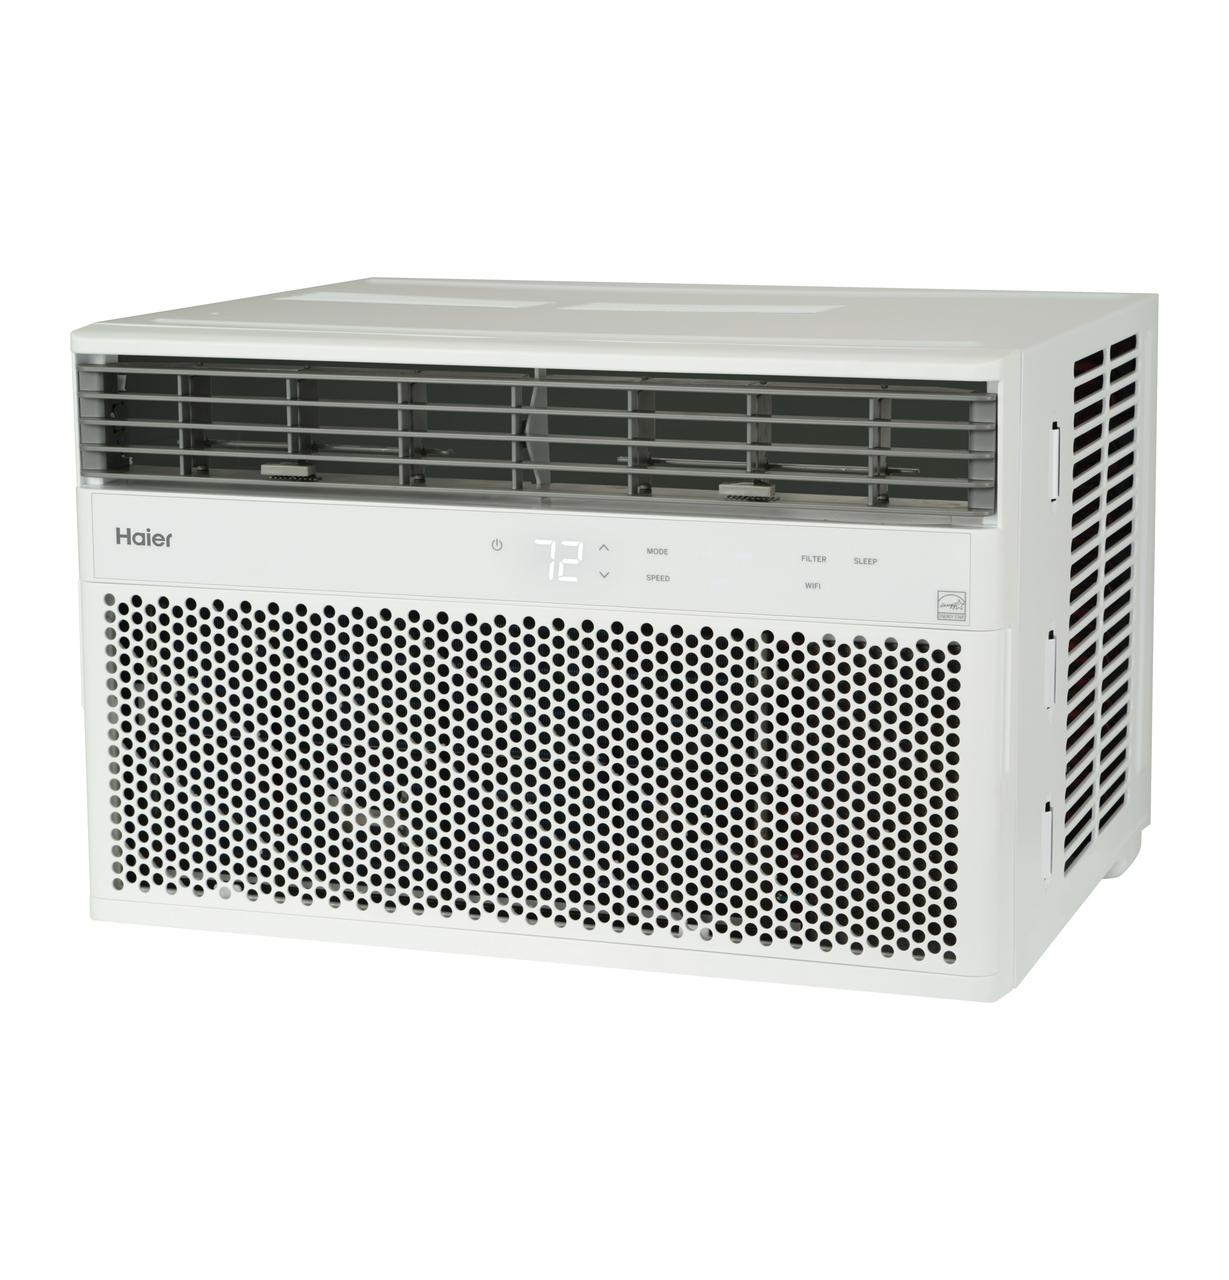 Haier QHEK14AC Haier 14,000 Btu Smart Electronic Window Air Conditioner For Large Rooms Up To 700 Sq. Ft.